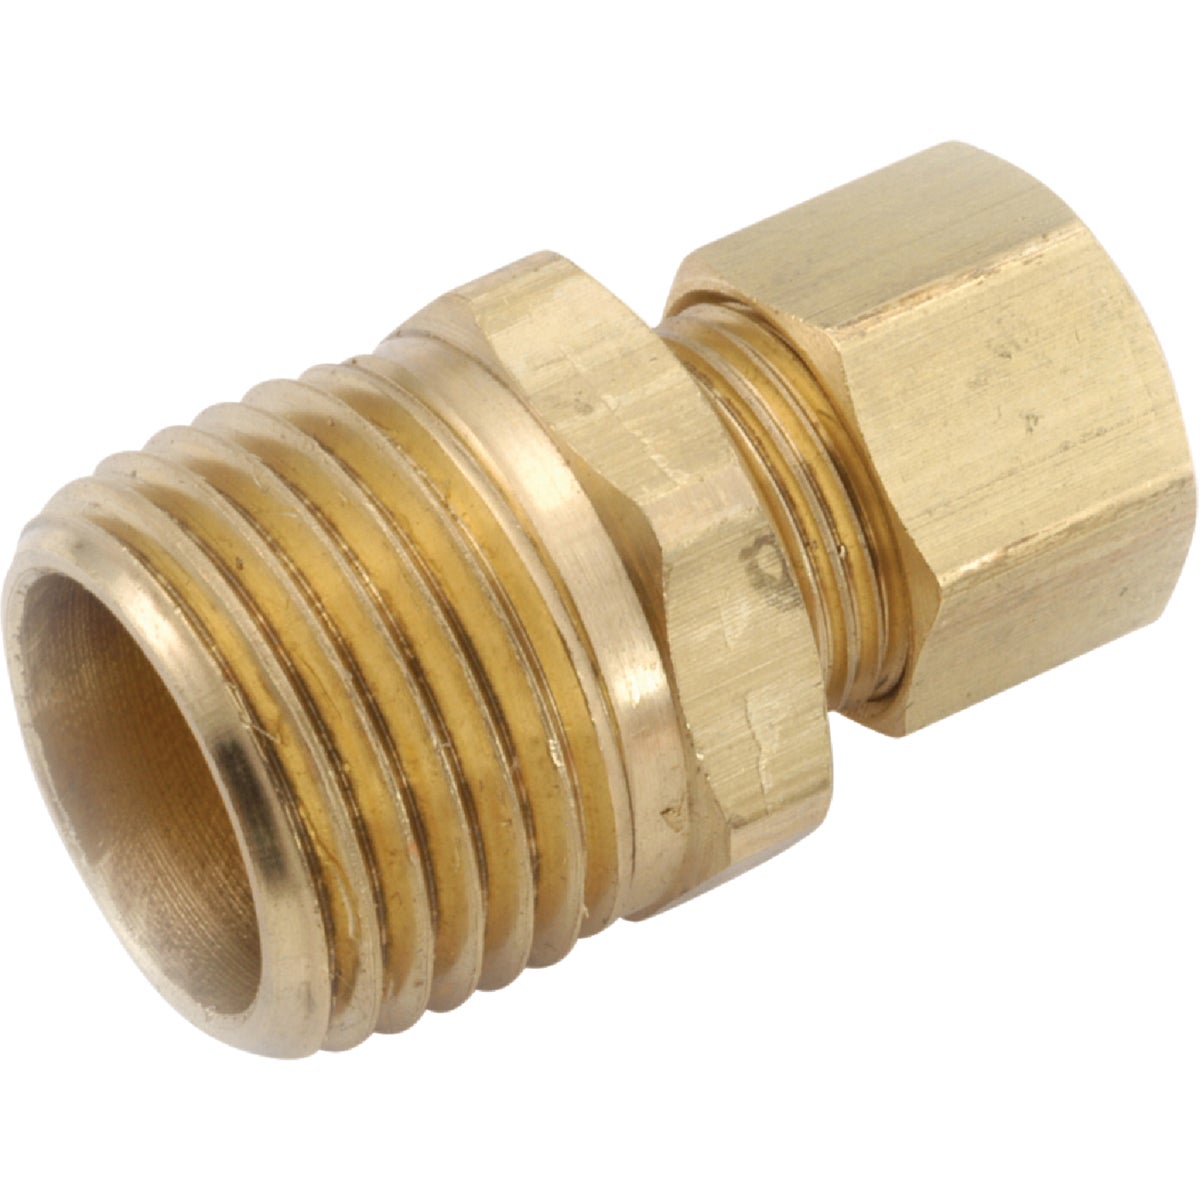 1/2X1/4 MALE CONNECTOR